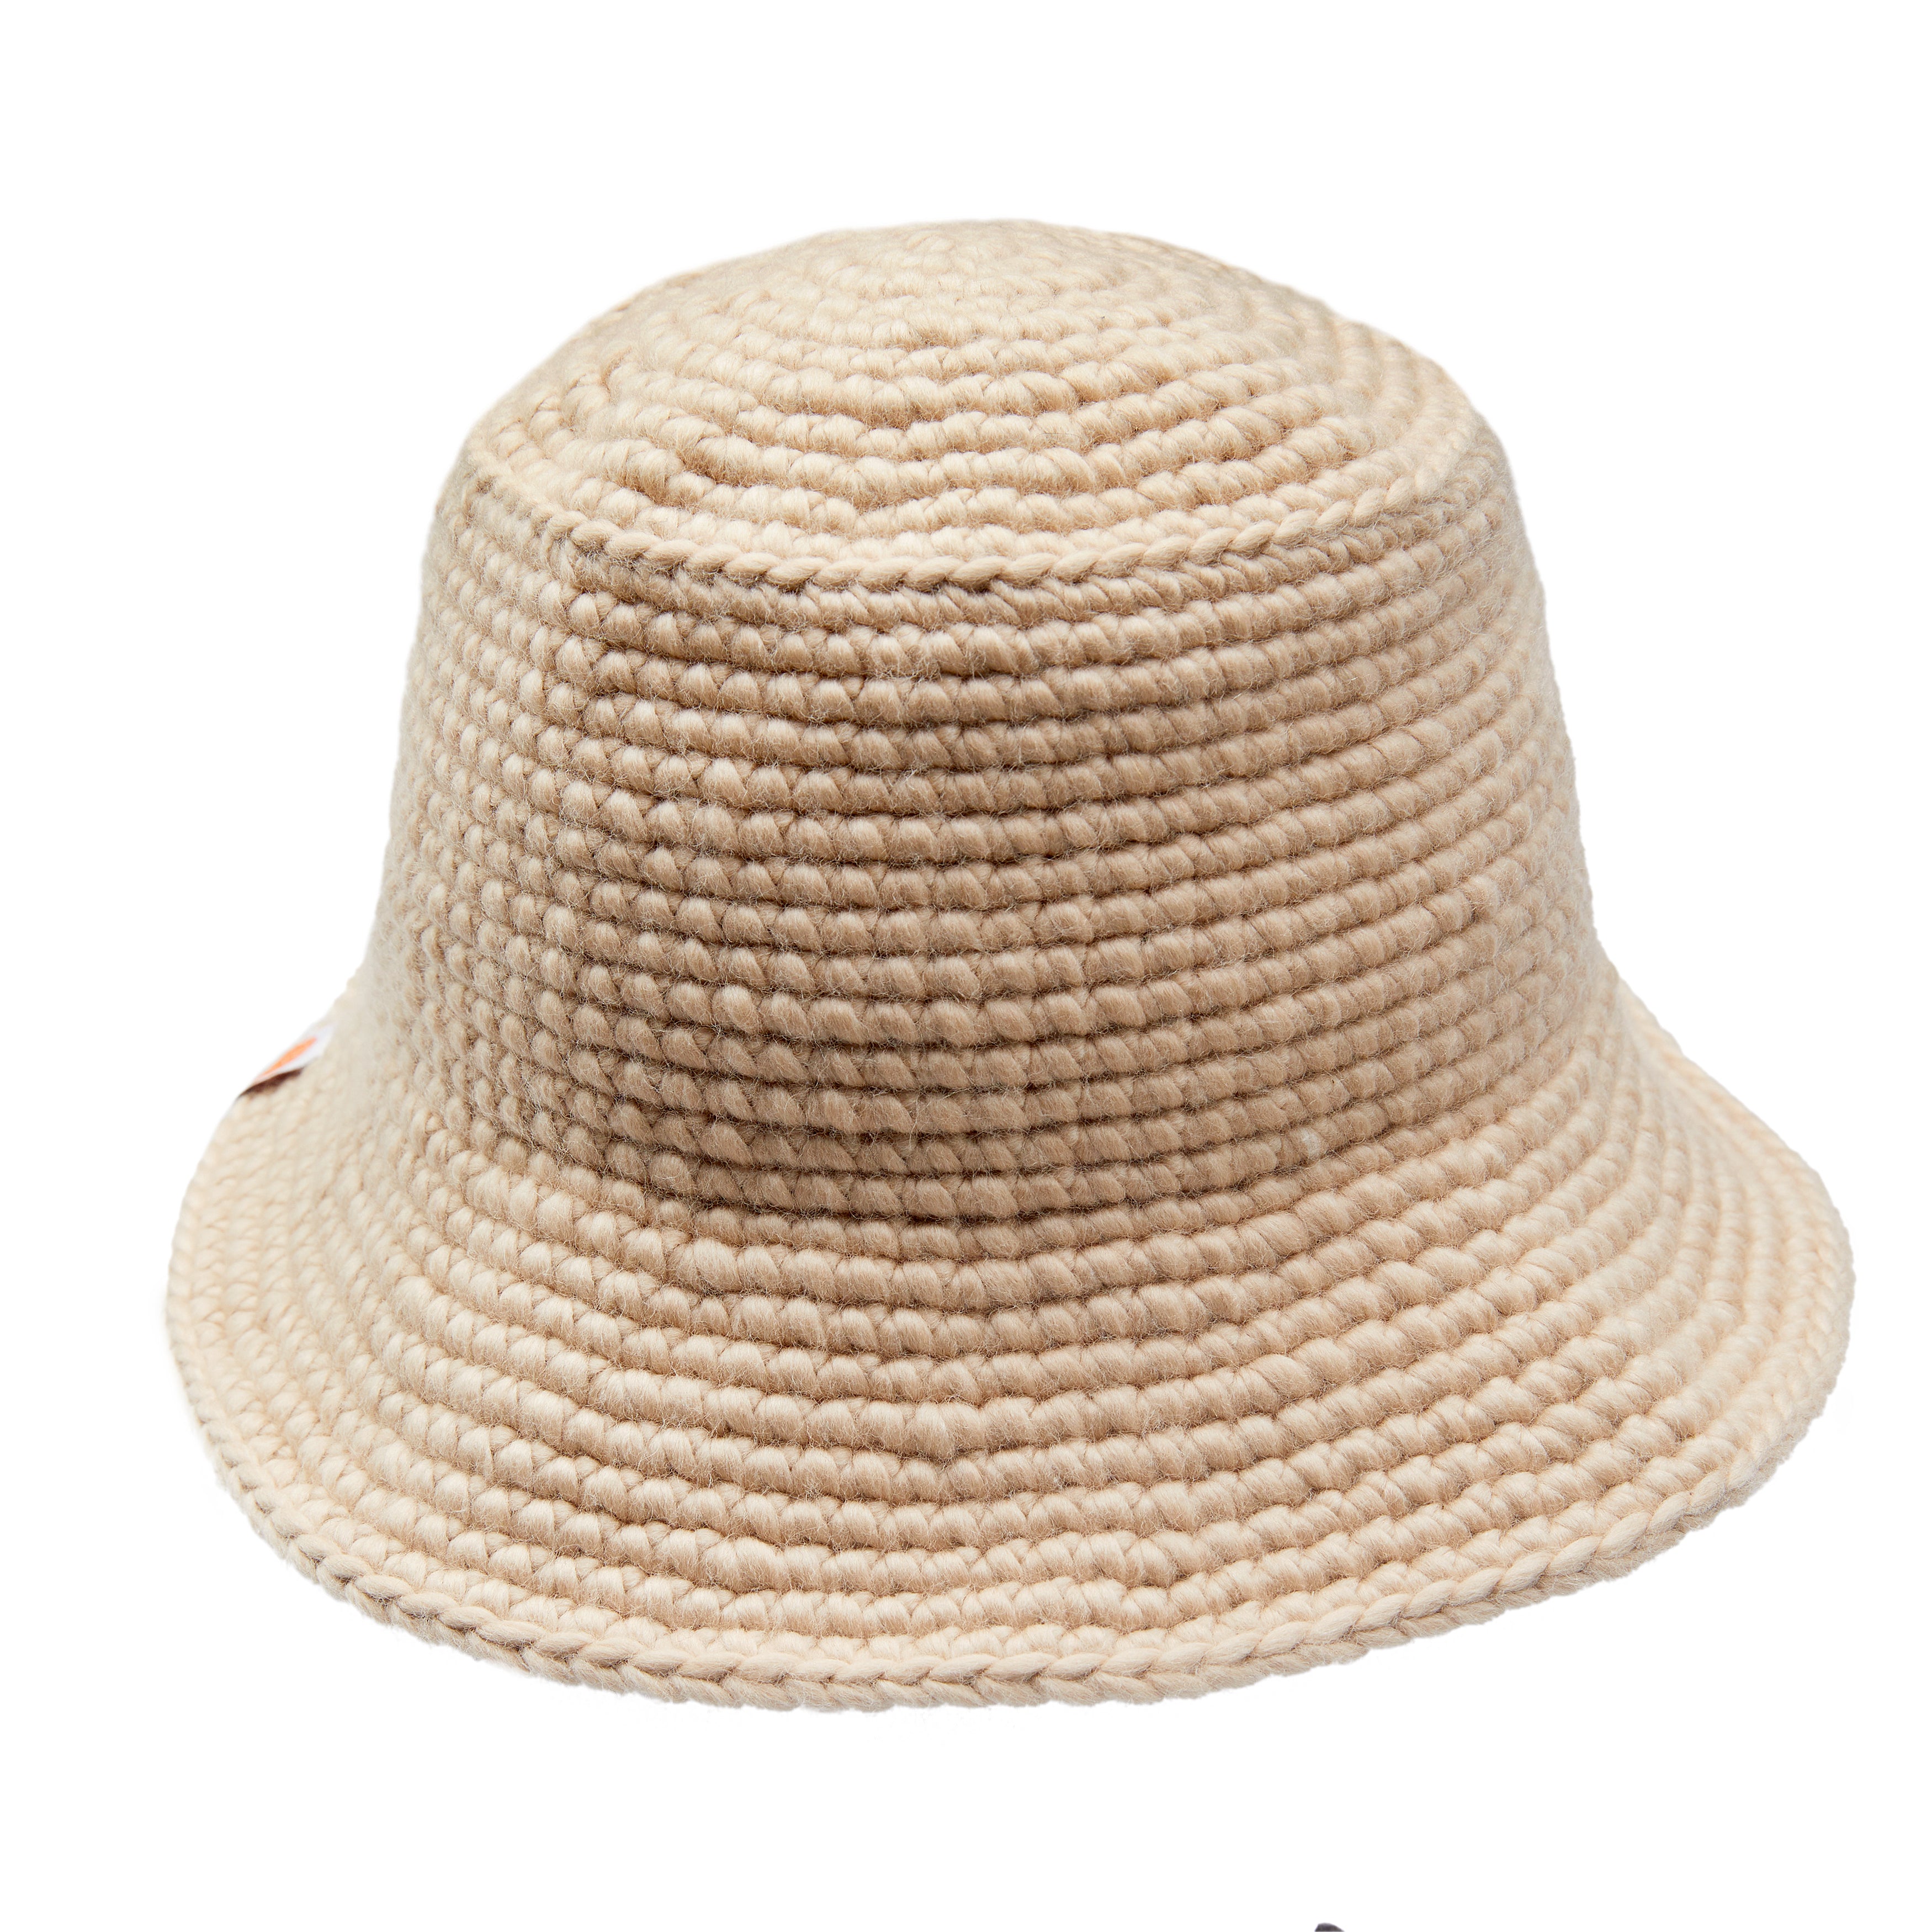 Bucket Hats | Cotton and Wool Bucket Hats | Sh*t That I Knit